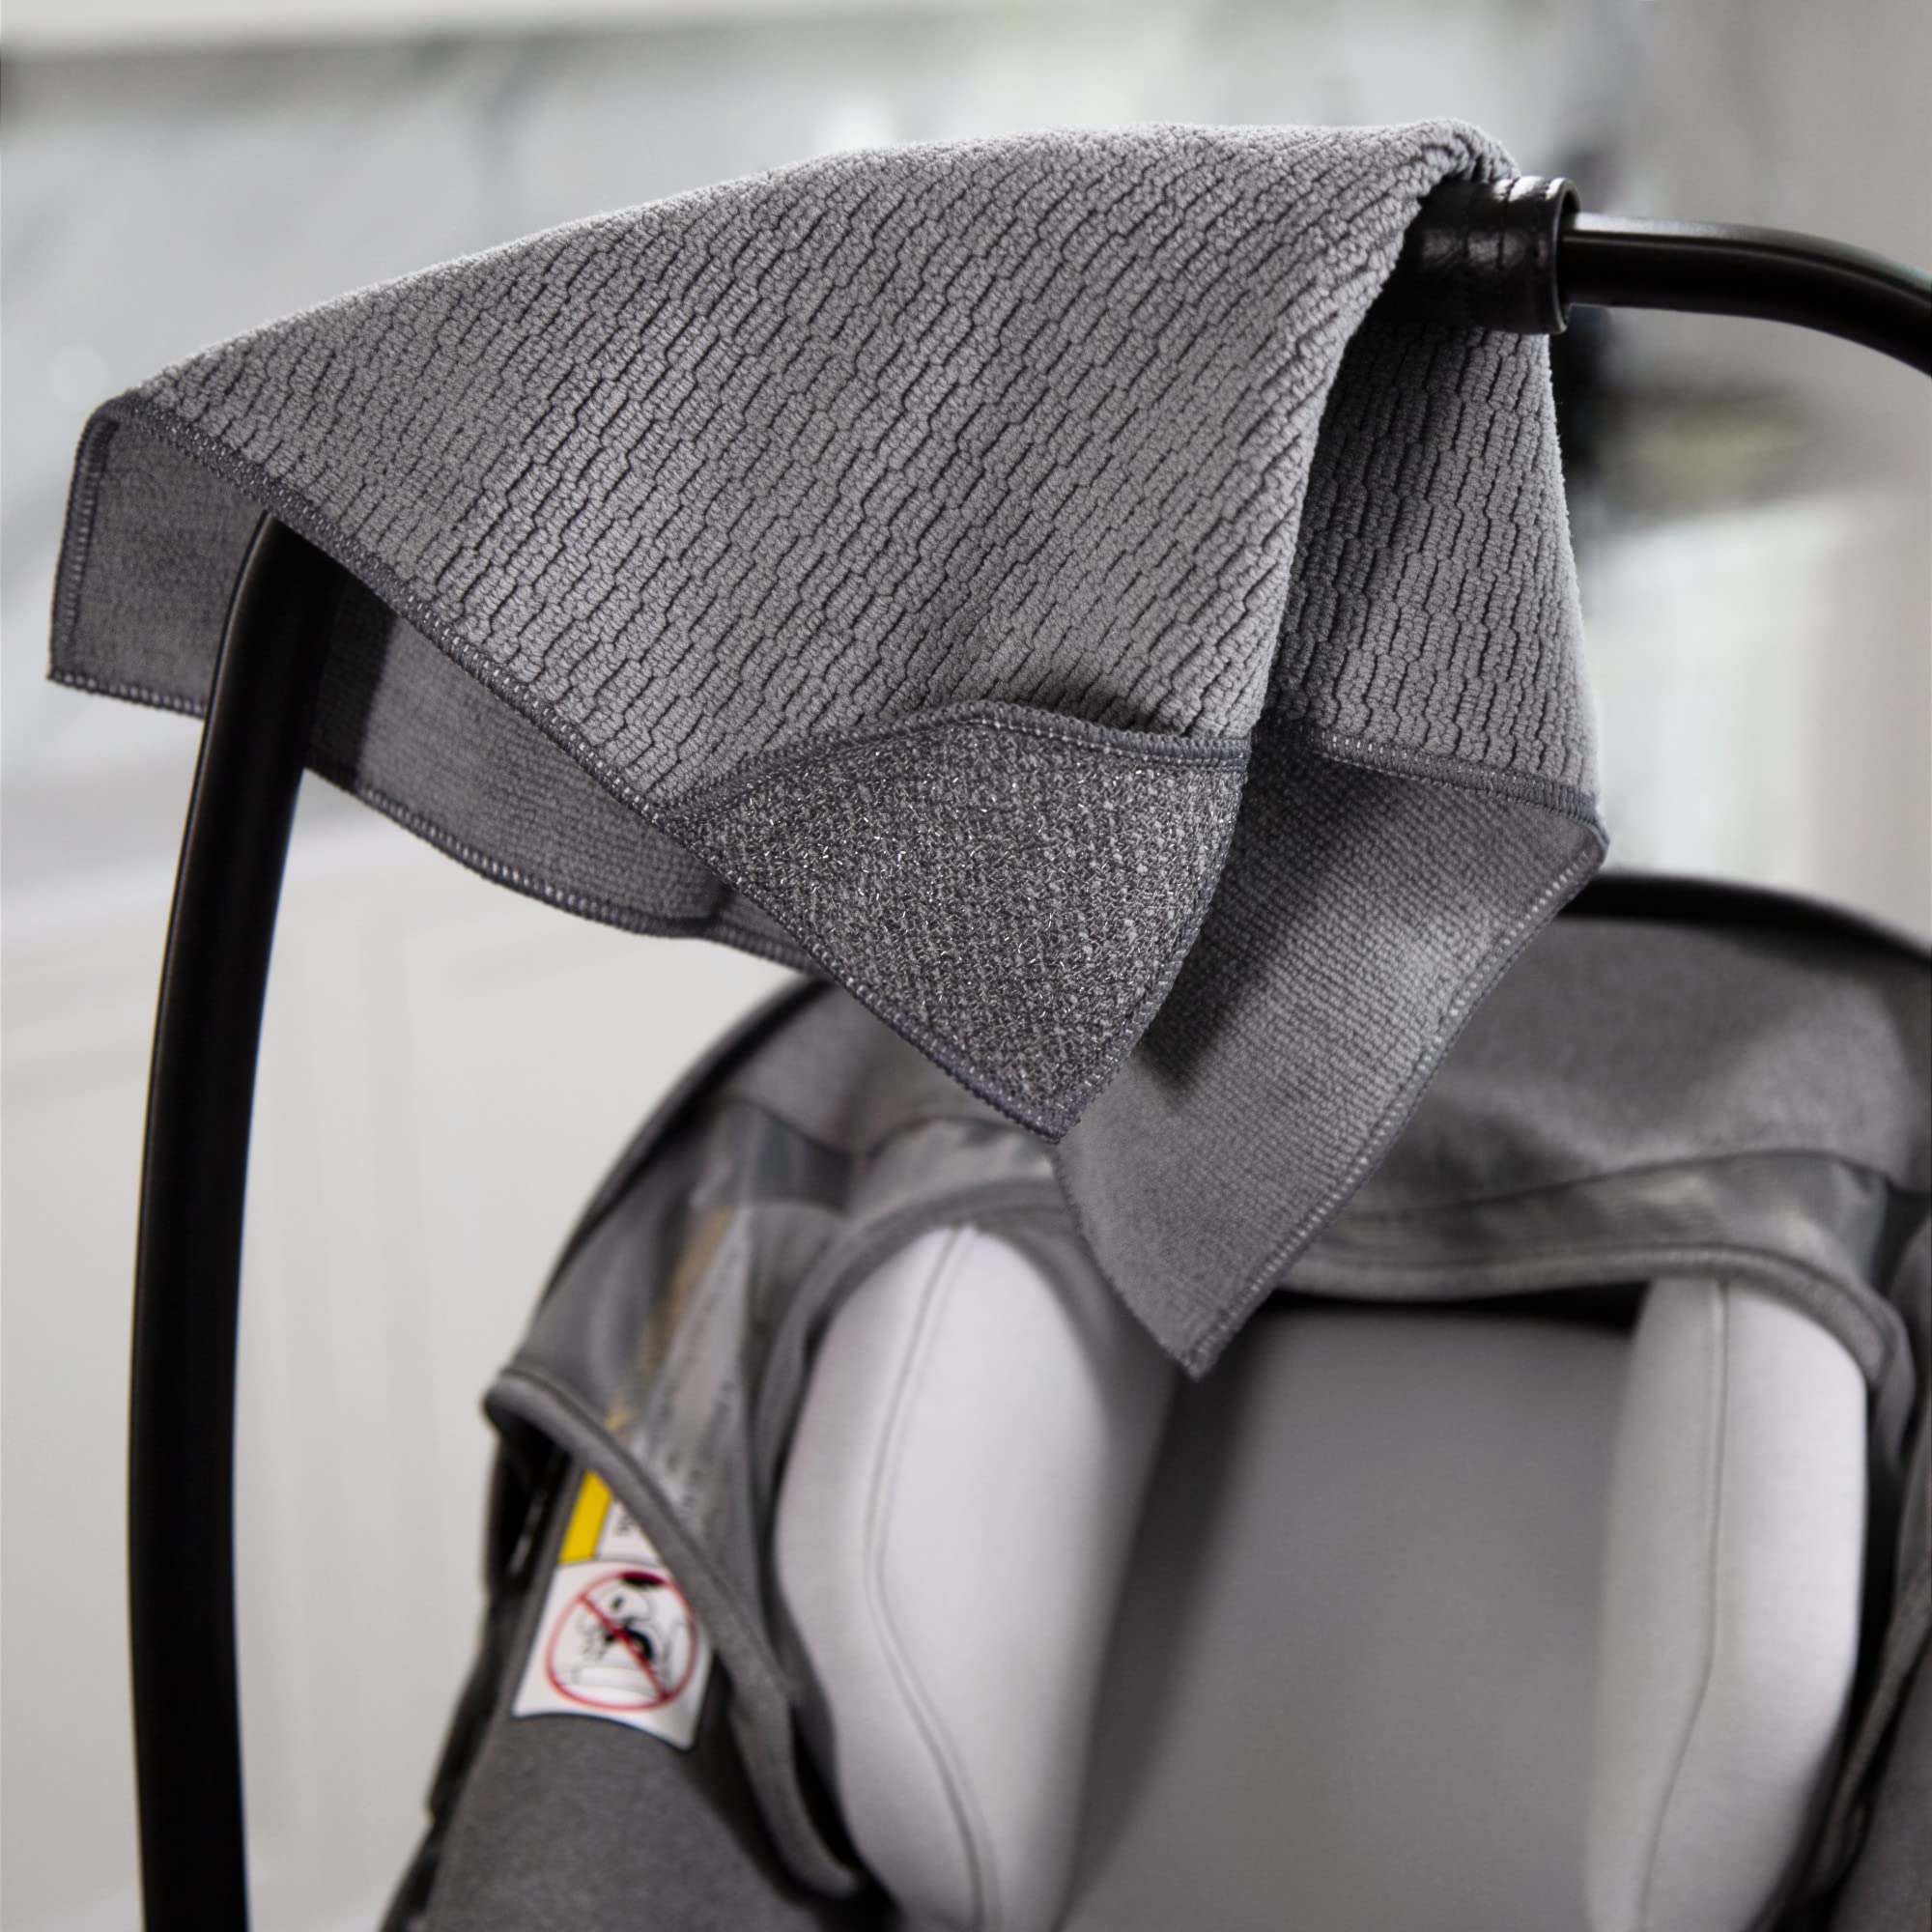 E-Cloth Stroller & Car Seat Cleaning Cloth, Premium Microfiber Cloth with Scrubbing Corner, Ideal for Cleaning Baby Stroller, Car Seats, Car Seat Cover, Booster Seat, 100 Wash Promise